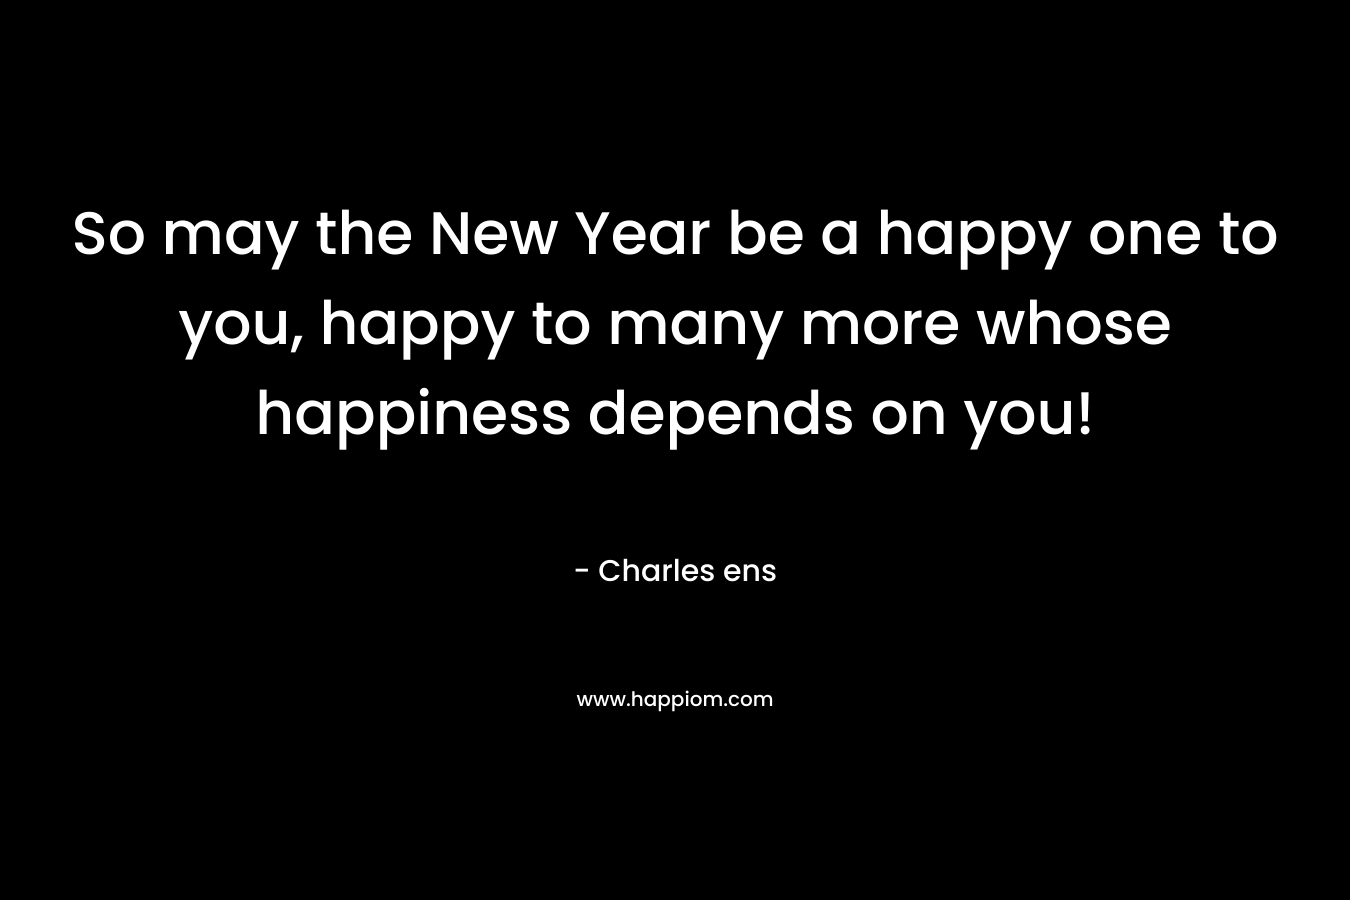 So may the New Year be a happy one to you, happy to many more whose happiness depends on you! – Charles ens